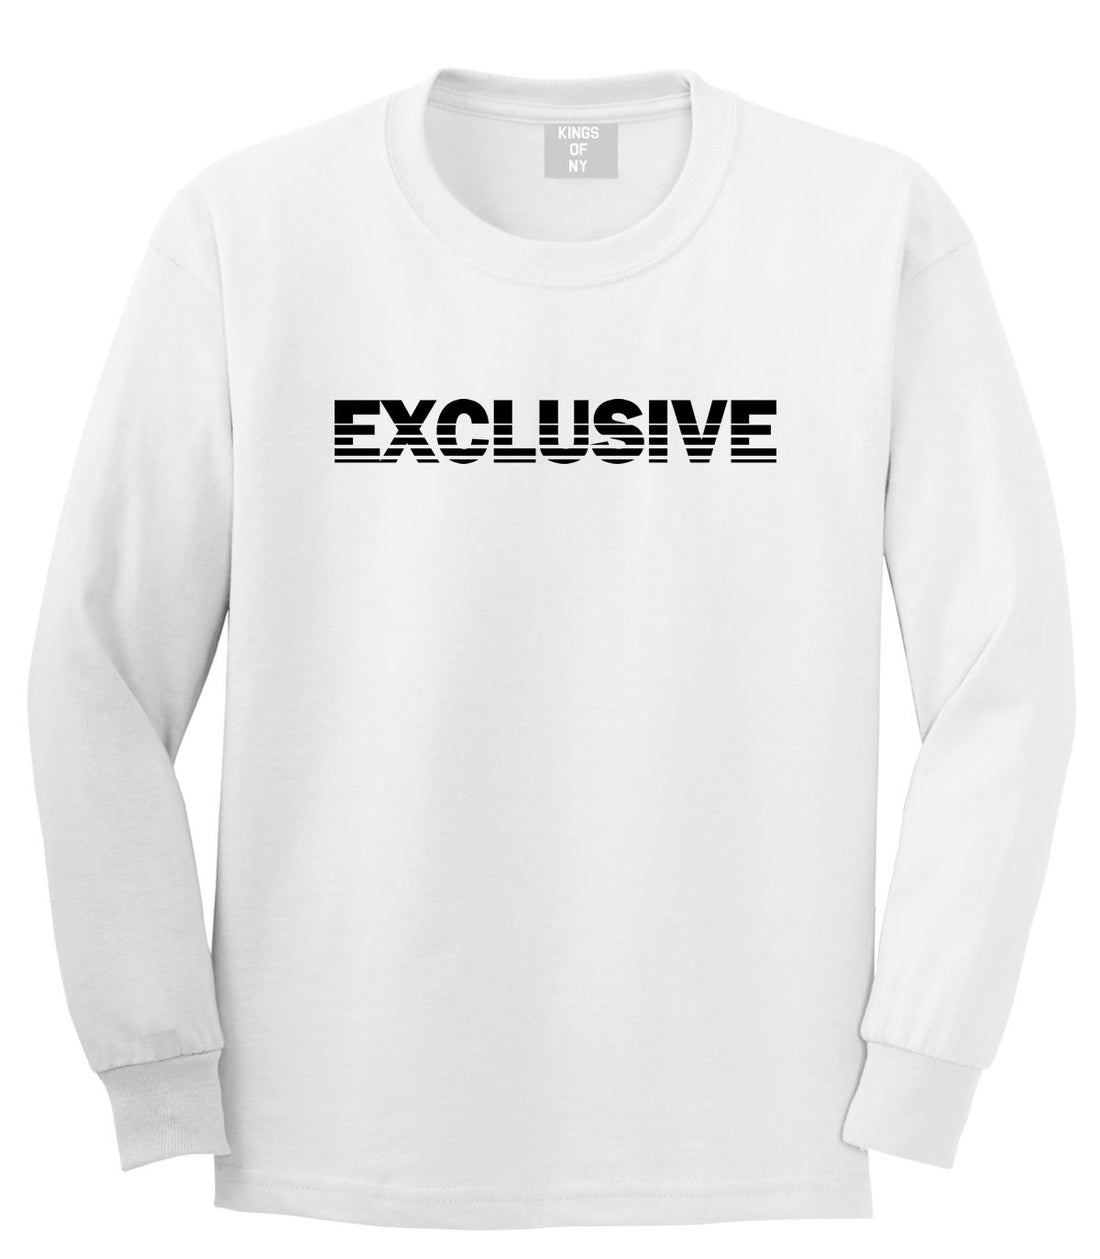 Exclusive Racing Style Long Sleeve T-Shirt in White by Kings Of NY